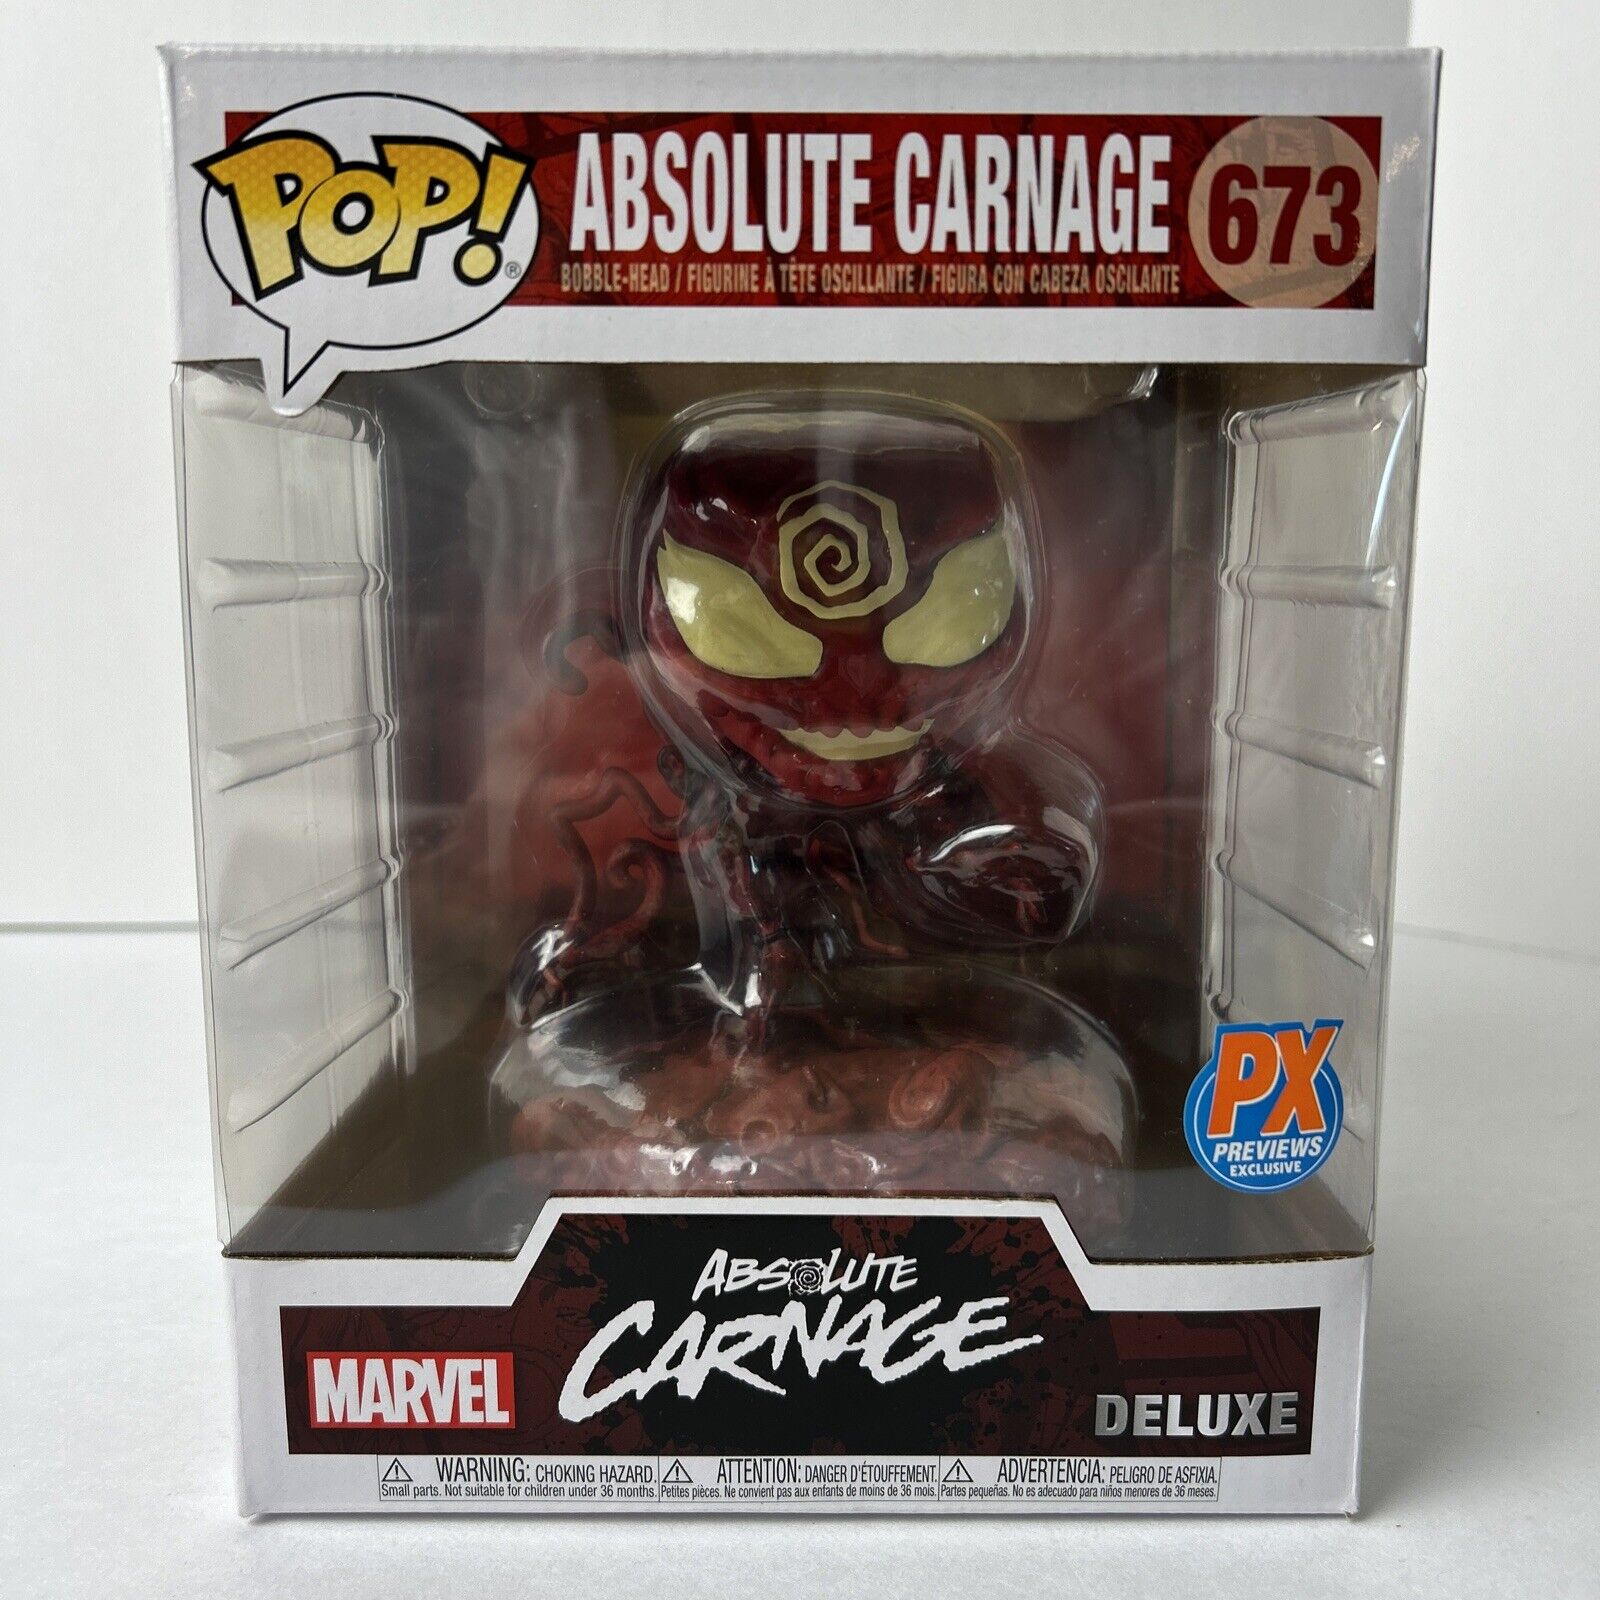 Funko Pop Marvel Absolute Carnage #673 Absolute Carnage PX Previews Exclusive